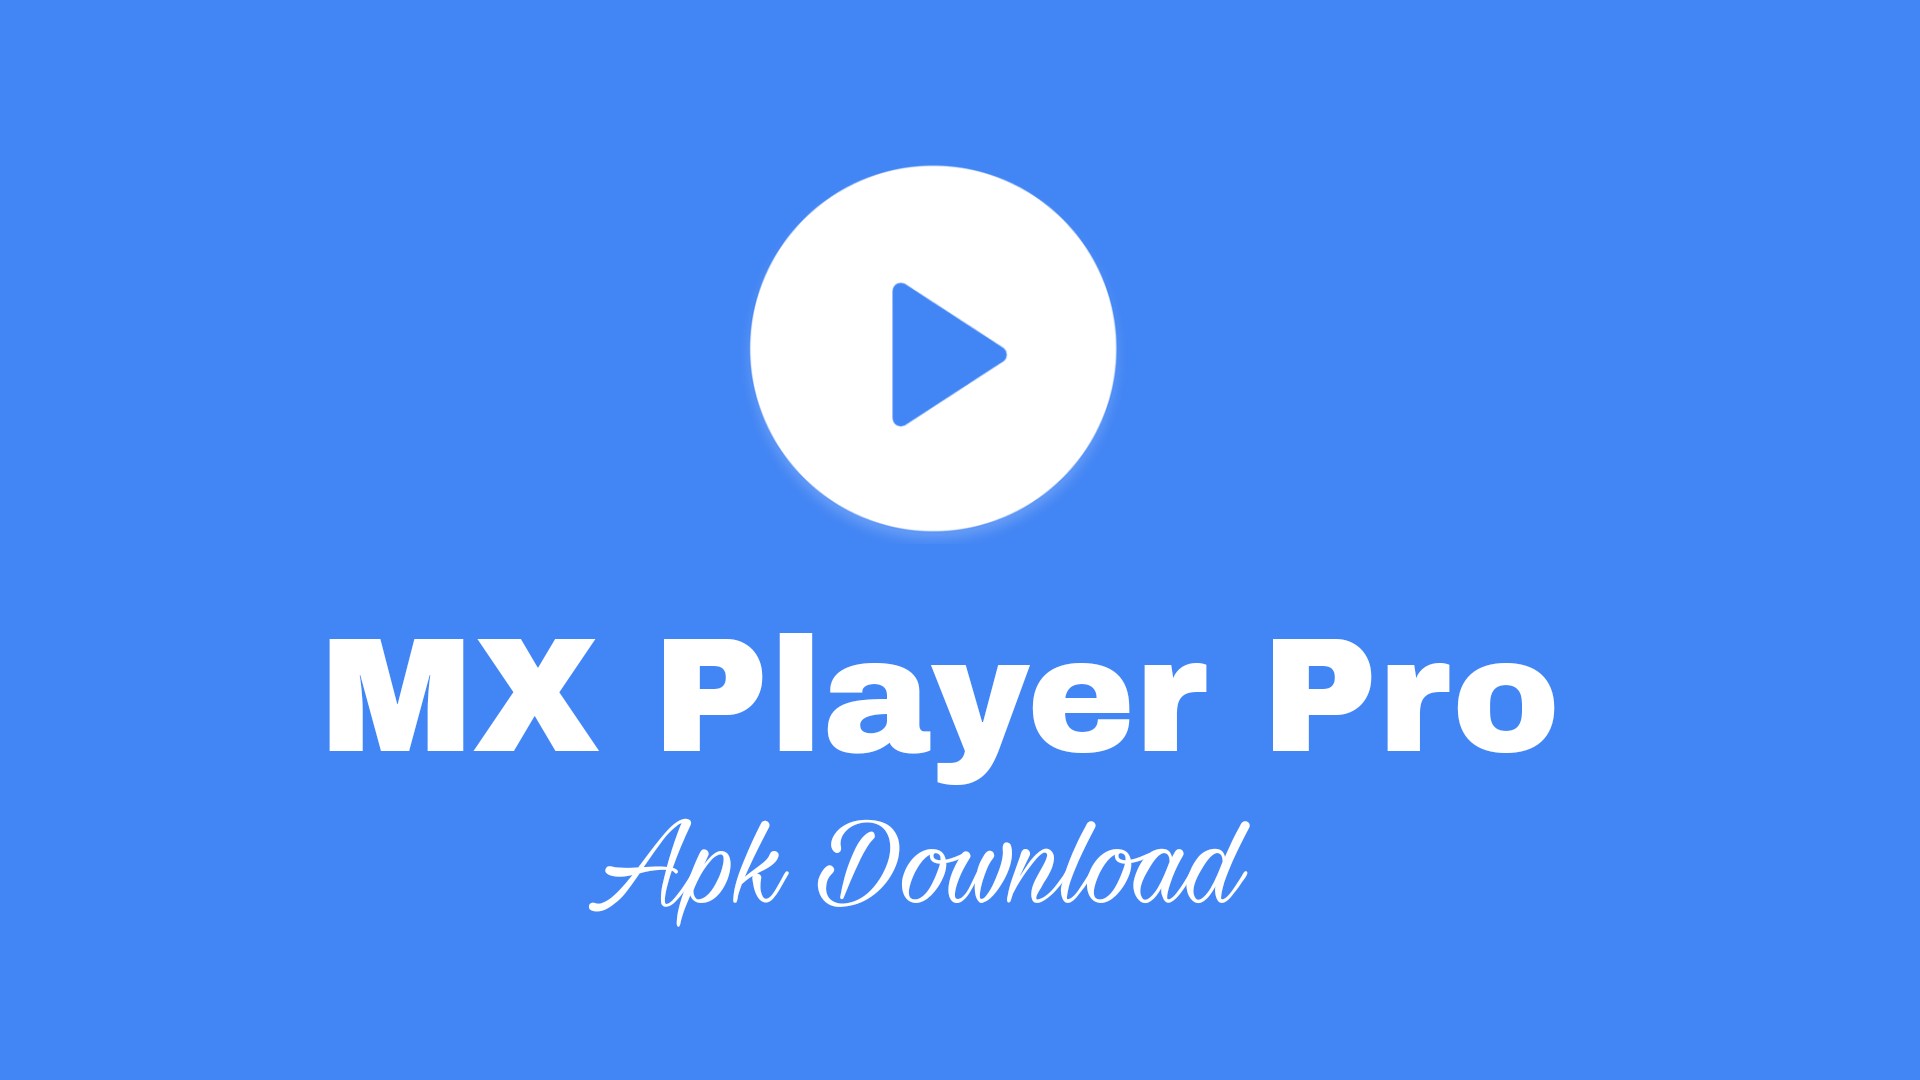 MX Player Pro APK 1.47.7 Download Latest (100% Working)